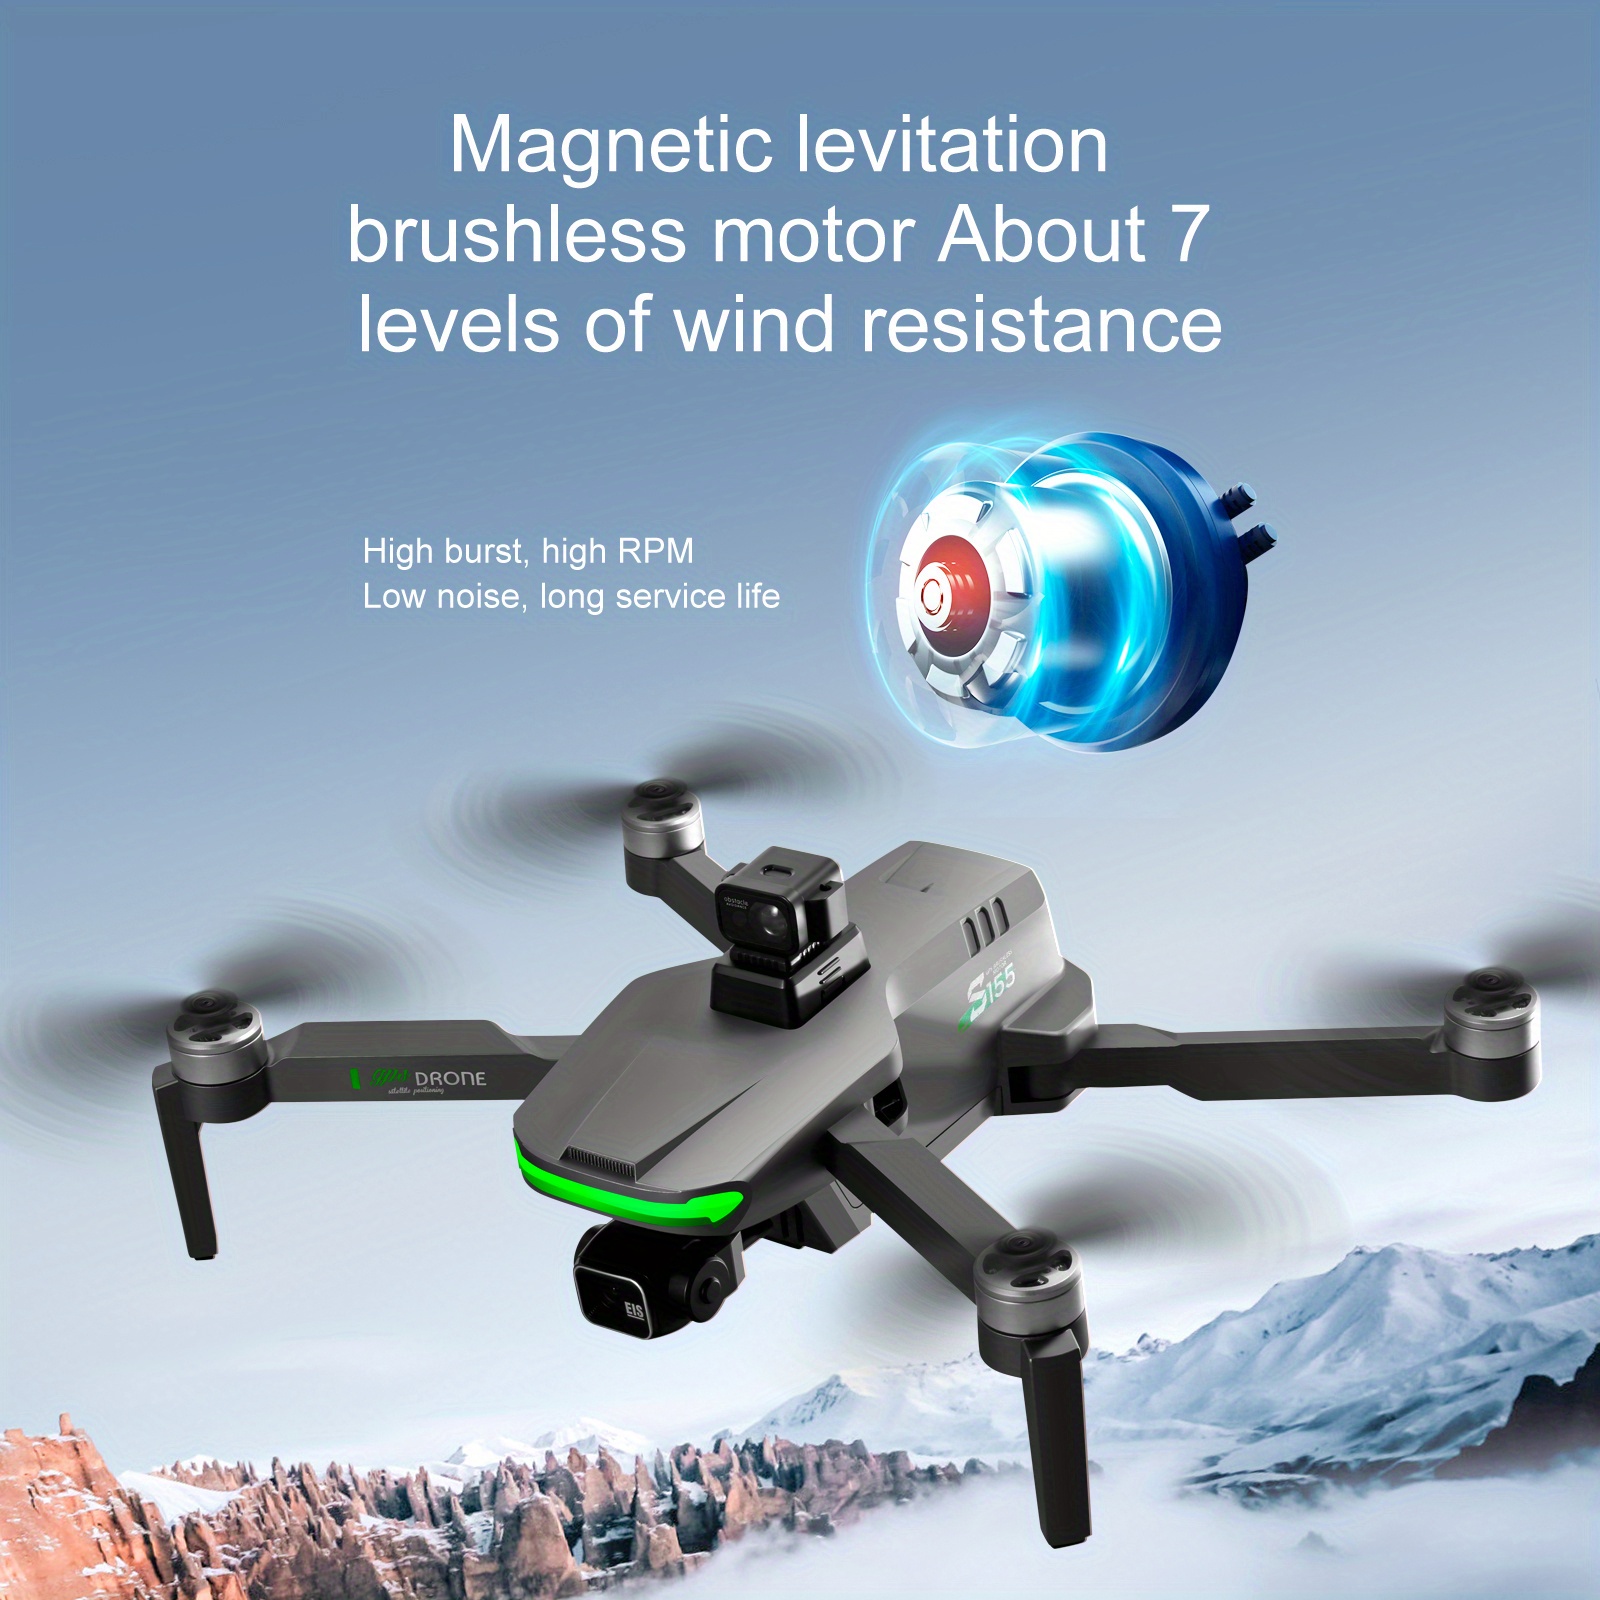 s155 professional drone uav quadcopter get the most out of your flight with gps relay brushless motor 500g payload 3 axis gimbal stabilizer christmas halloween thanksgiving gift details 7